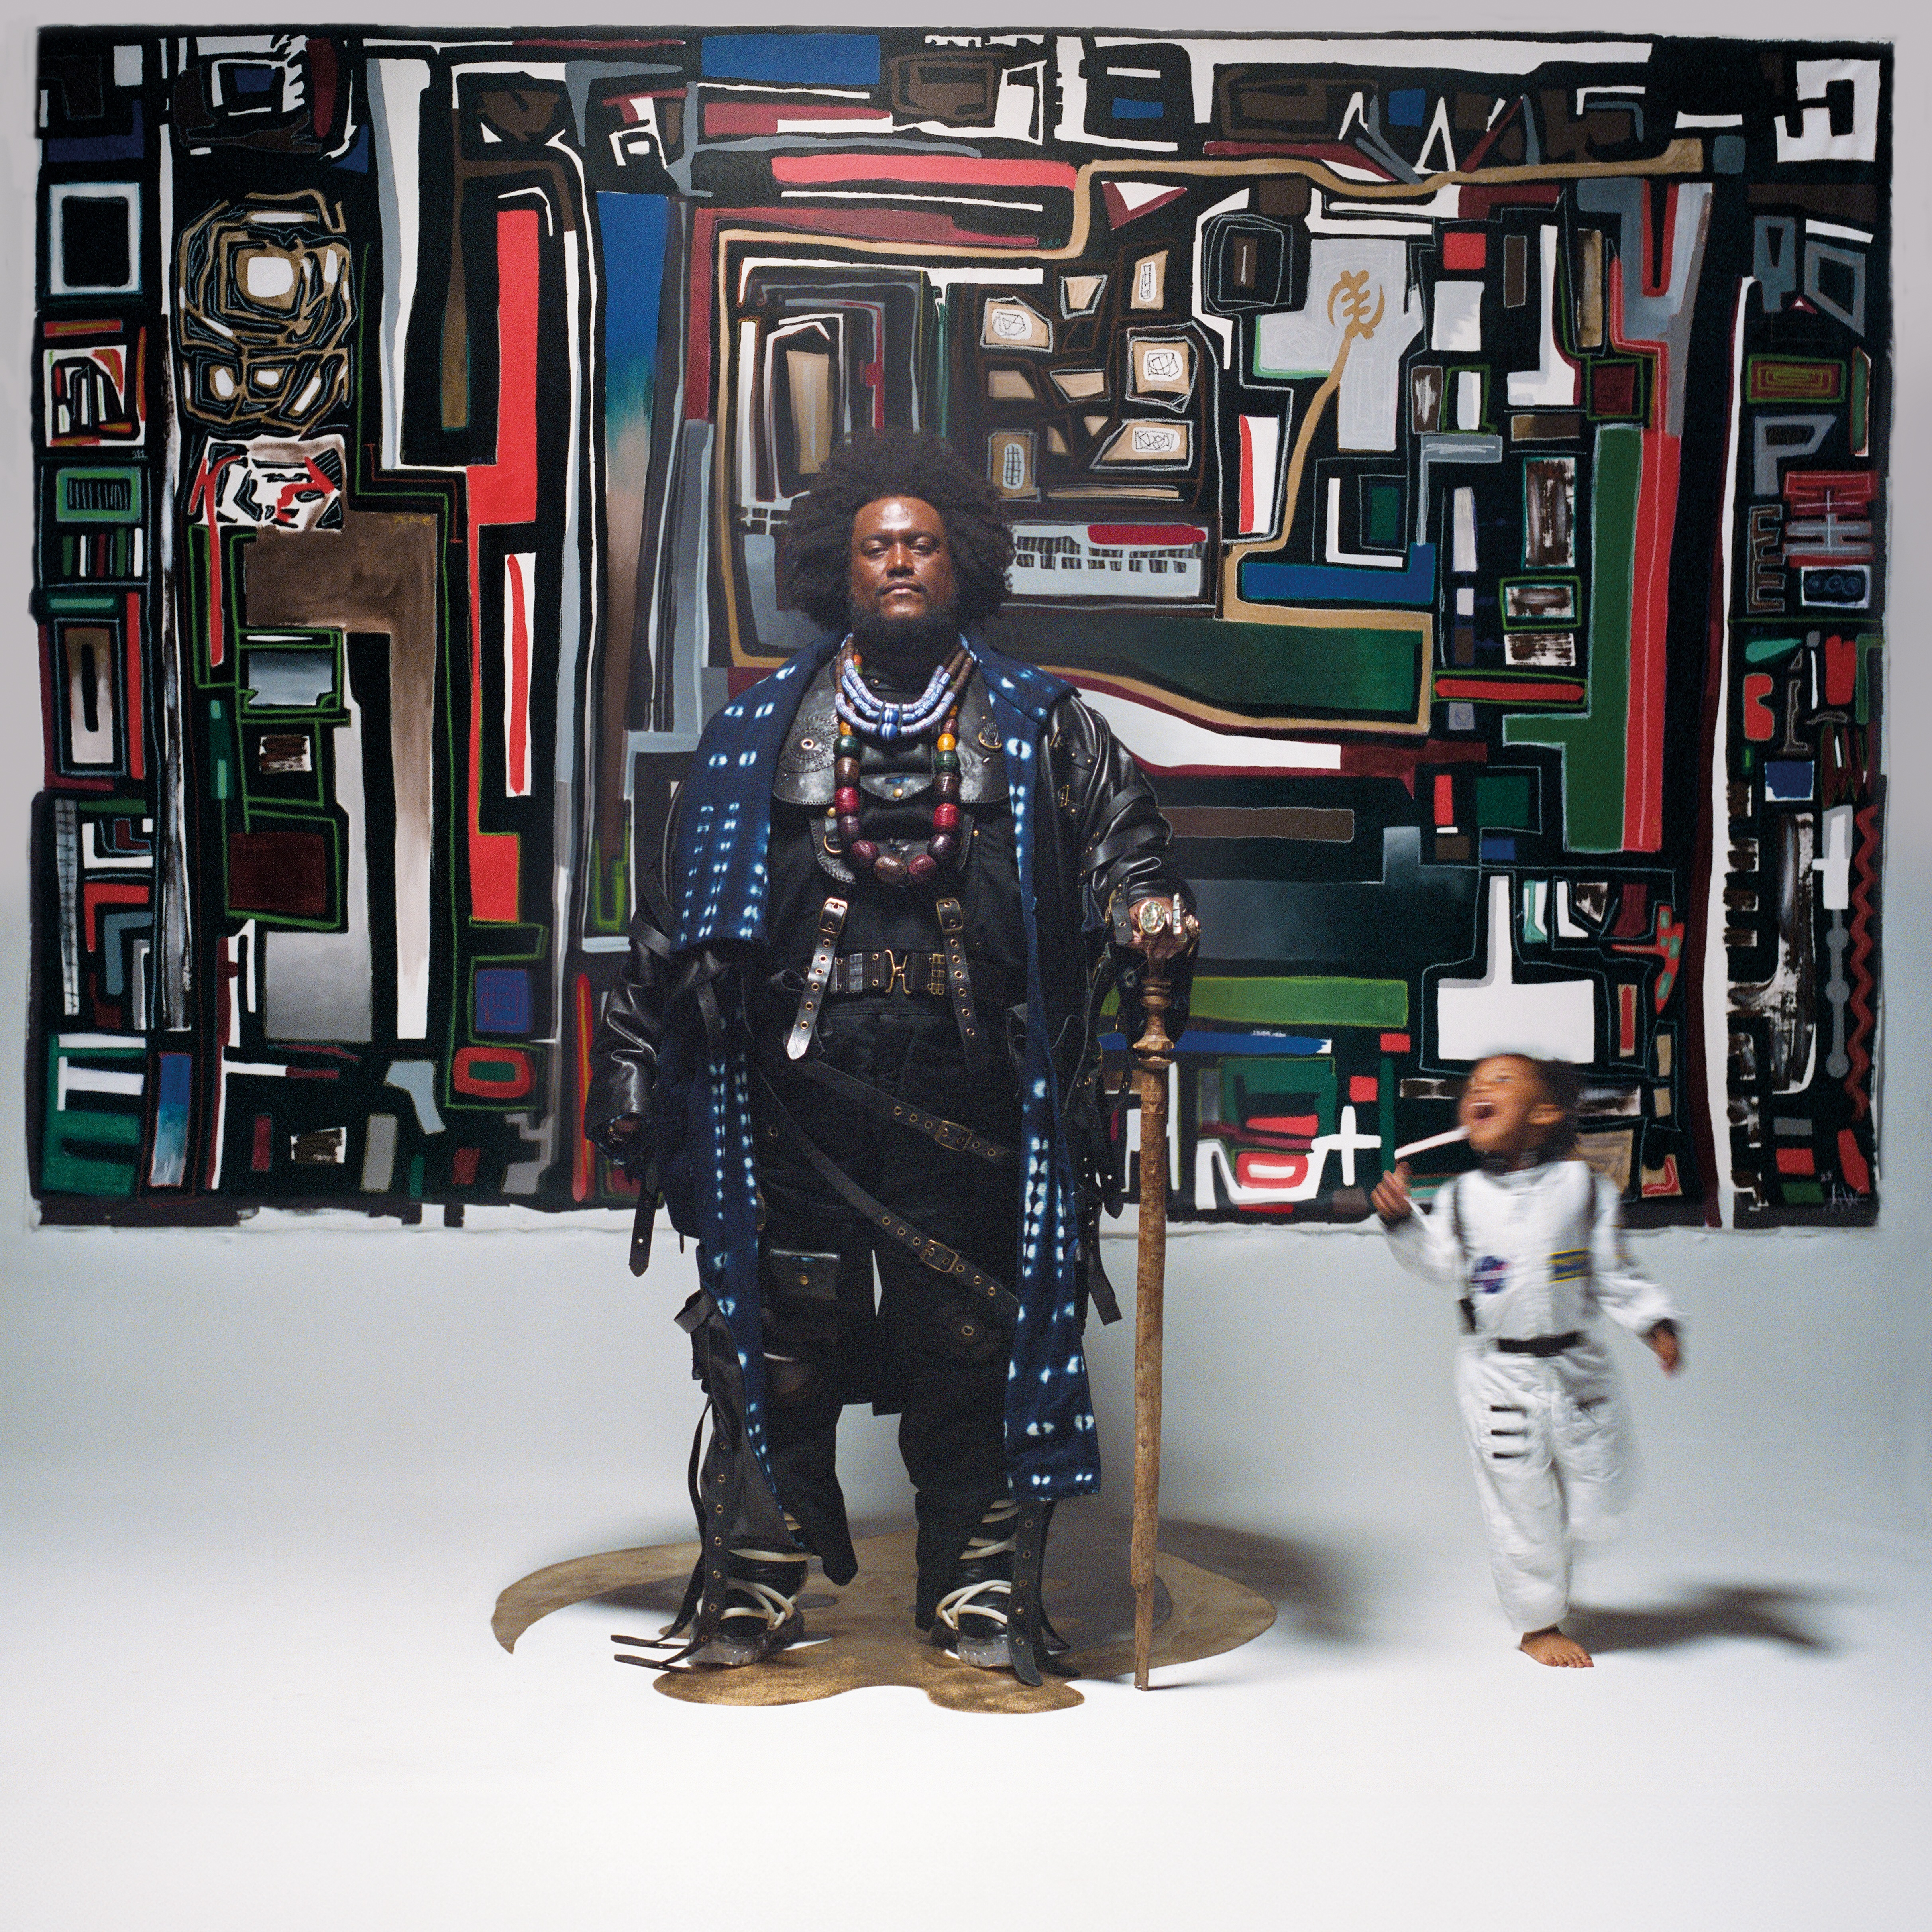 Kamasi Washington stands in front of a painted mural, wearing fusion Afro/samurai armour with his daughter running around